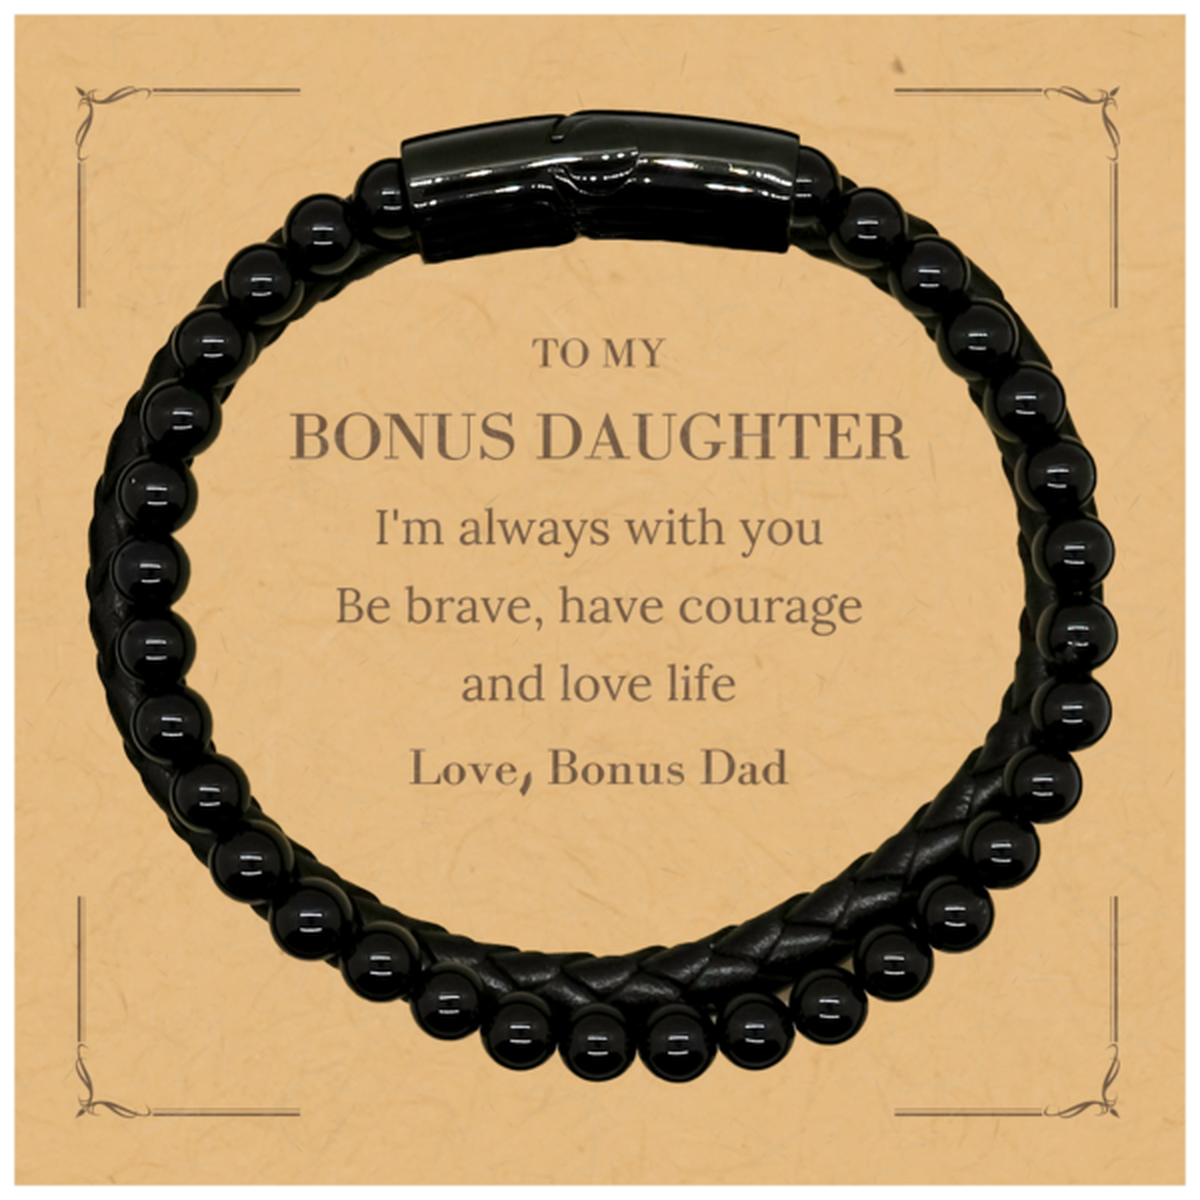 To My Bonus Daughter Gifts from Bonus Dad, Unique Stone Leather Bracelets Inspirational Christmas Birthday Graduation Gifts for Bonus Daughter I'm always with you. Be brave, have courage and love life. Love, Bonus Dad